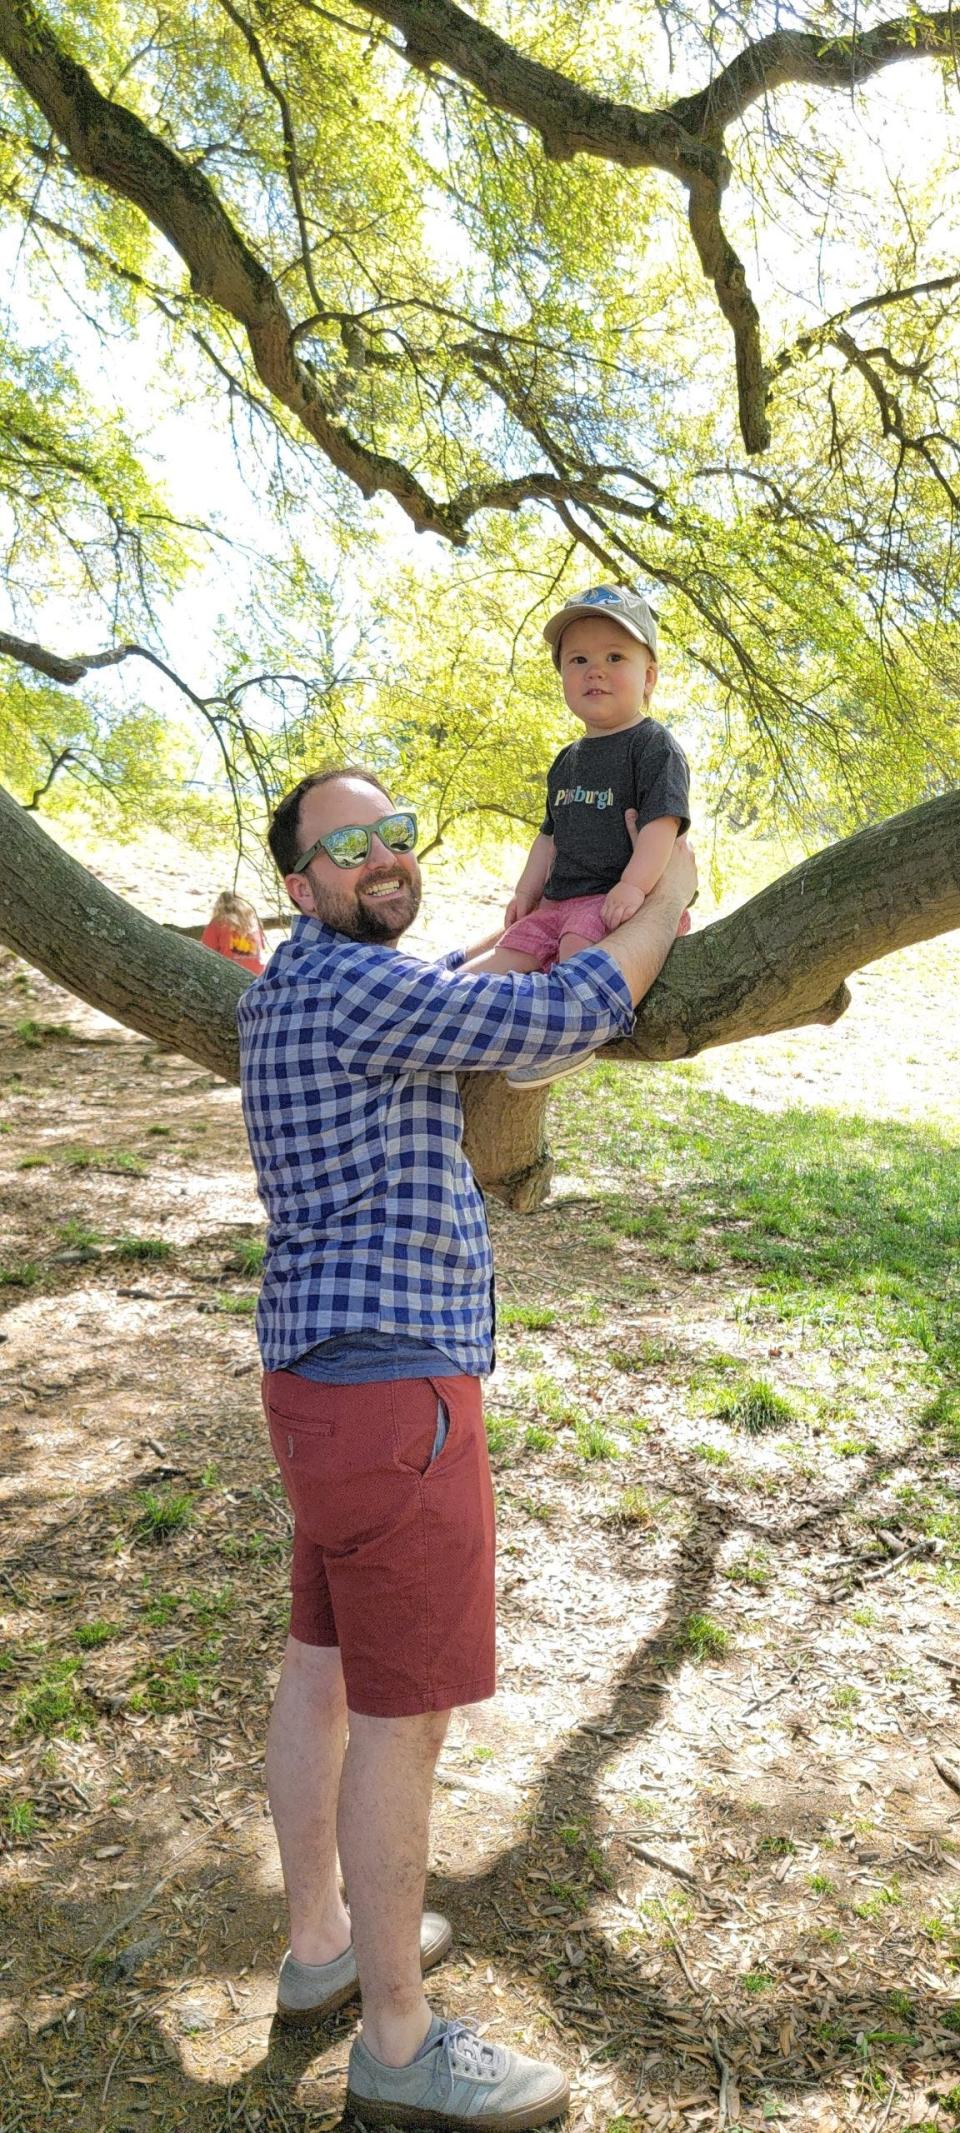 Aaron Beck, left, took his own life last year following the death of his son, Anderson, right, who had been left in a hot car.